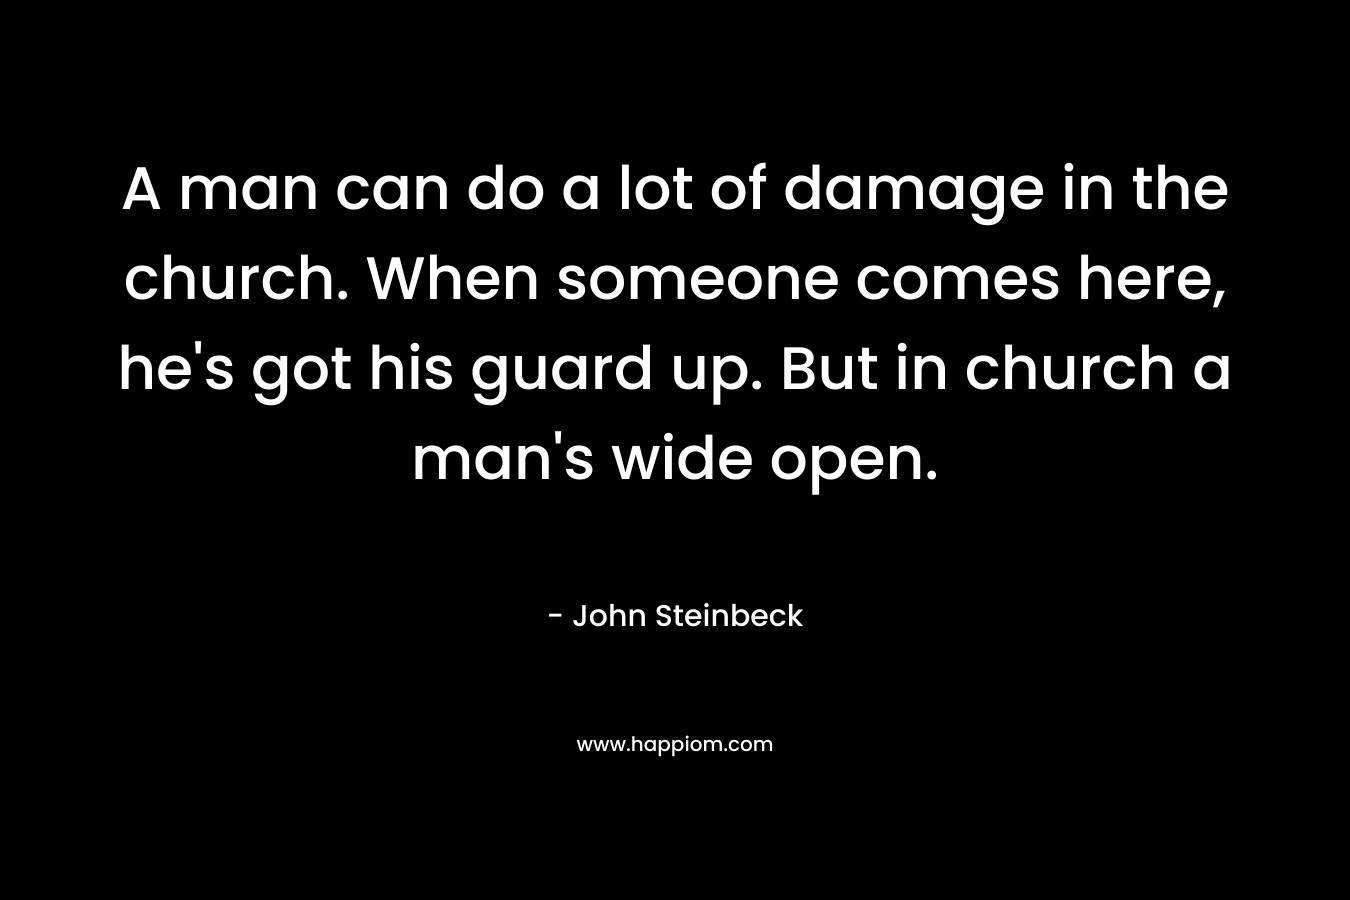 A man can do a lot of damage in the church. When someone comes here, he’s got his guard up. But in church a man’s wide open. – John Steinbeck